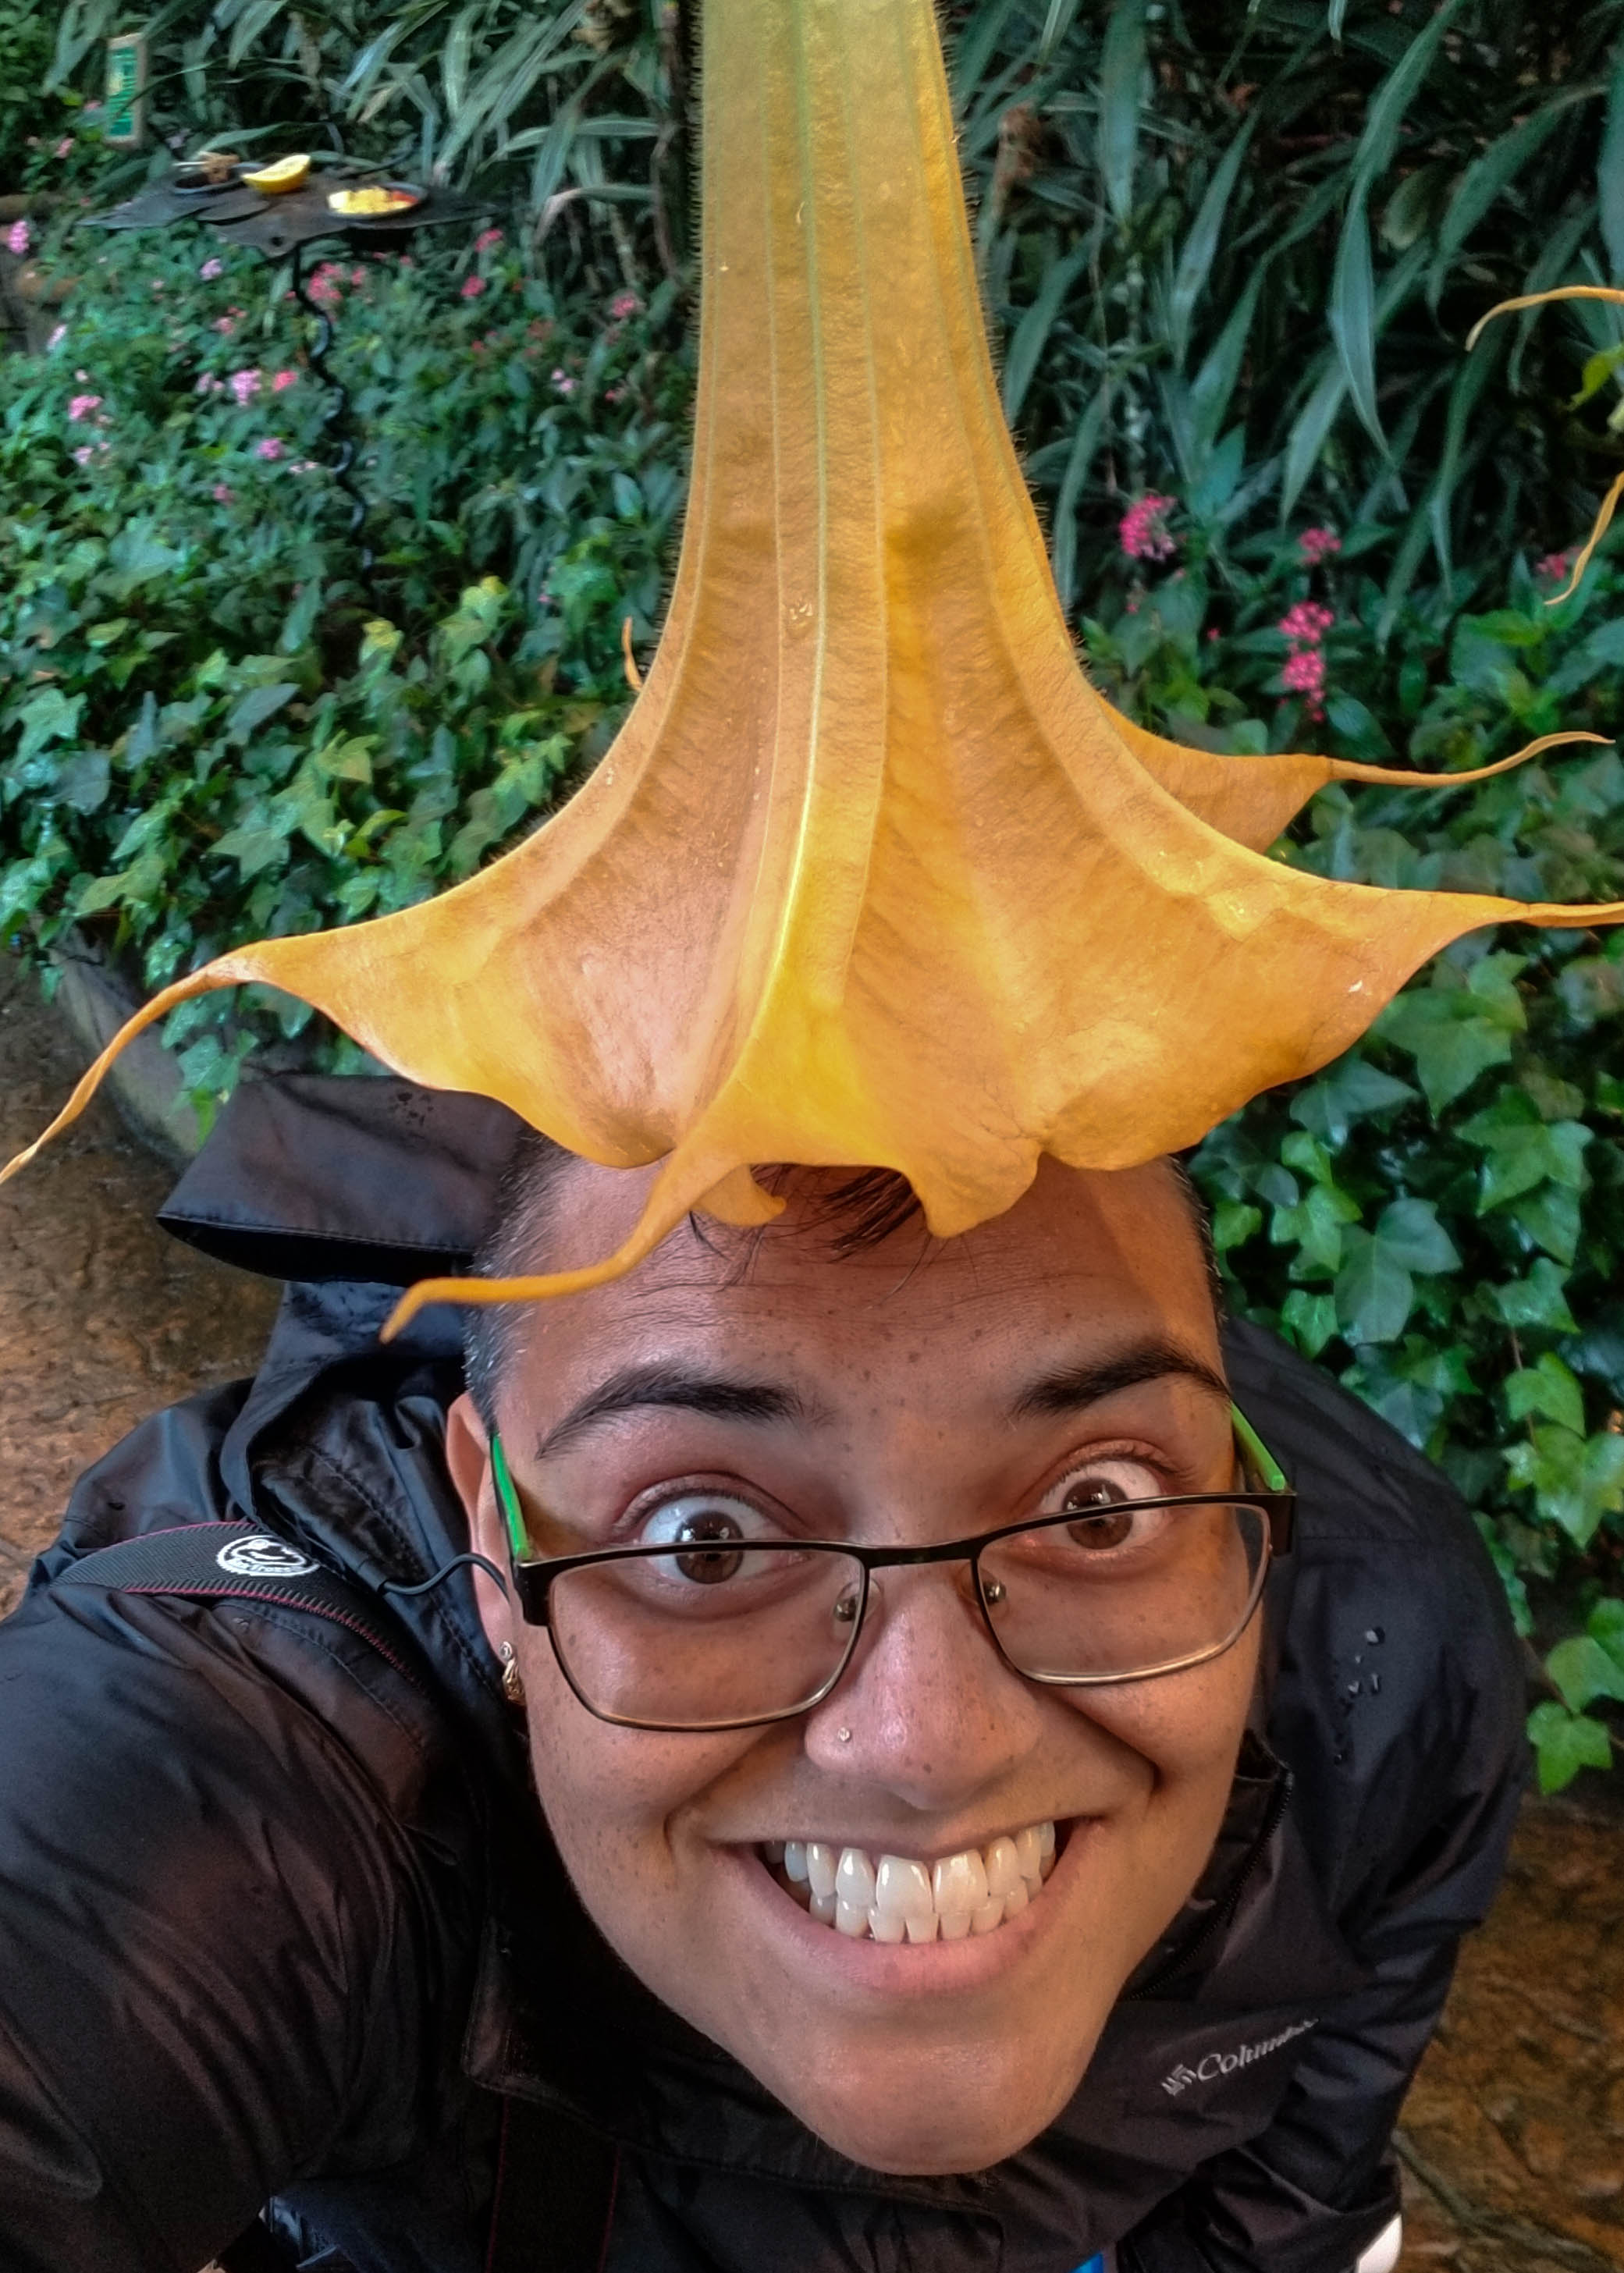 This Hat has Space for my Hairstyle!